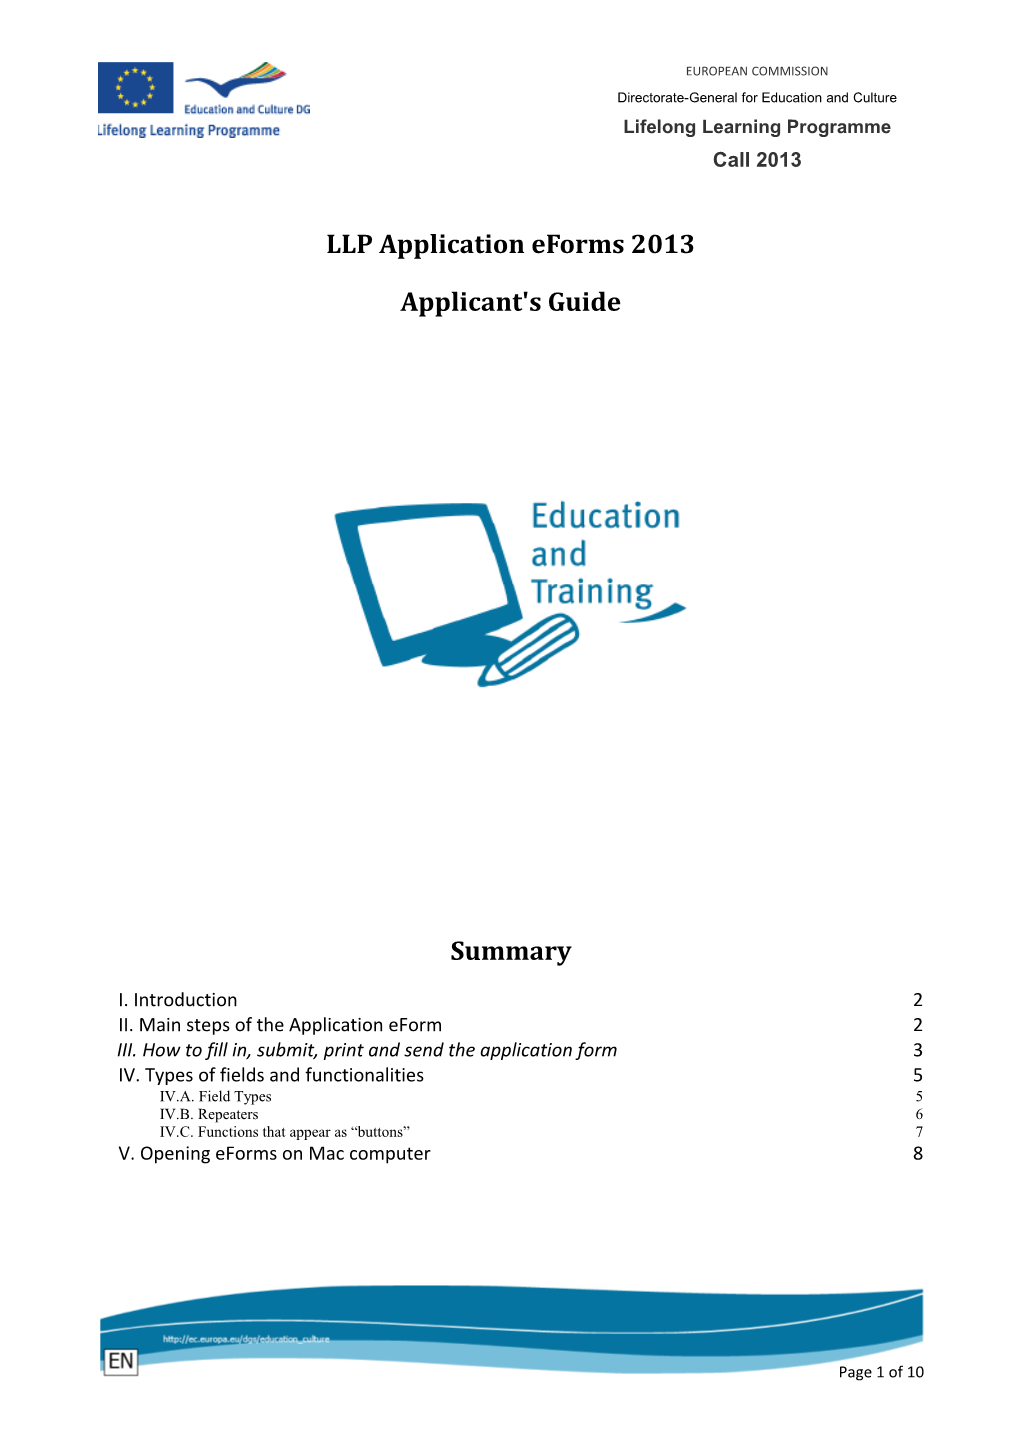 LLP Application Eforms